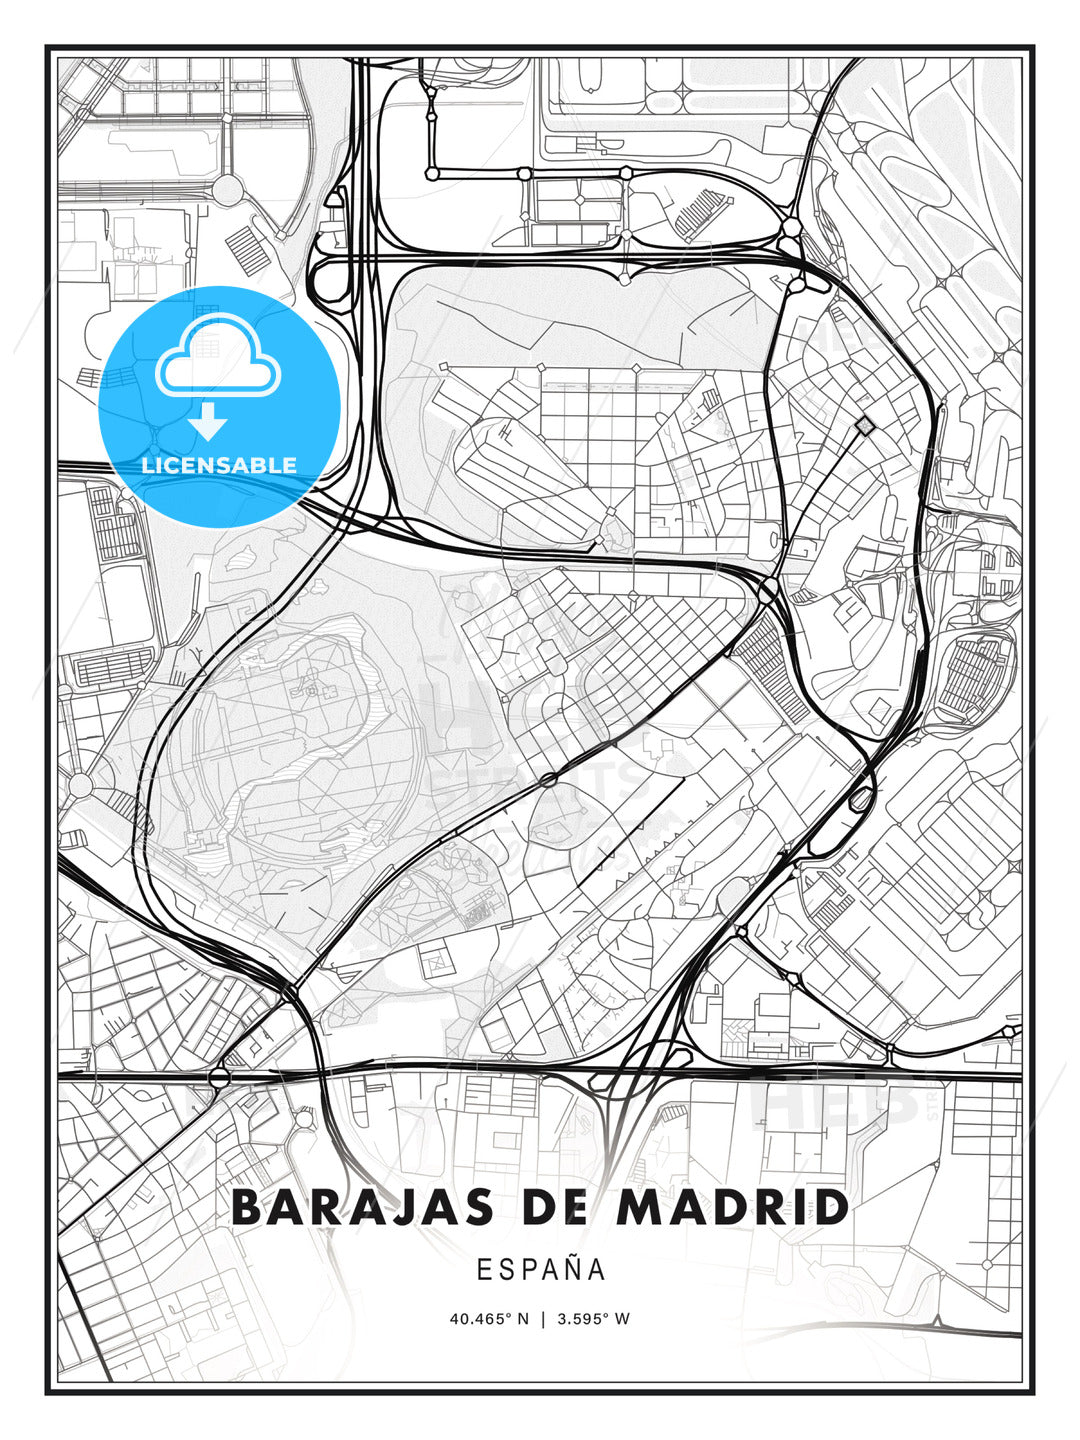 Barajas de Madrid, Spain, Modern Print Template in Various Formats - HEBSTREITS Sketches